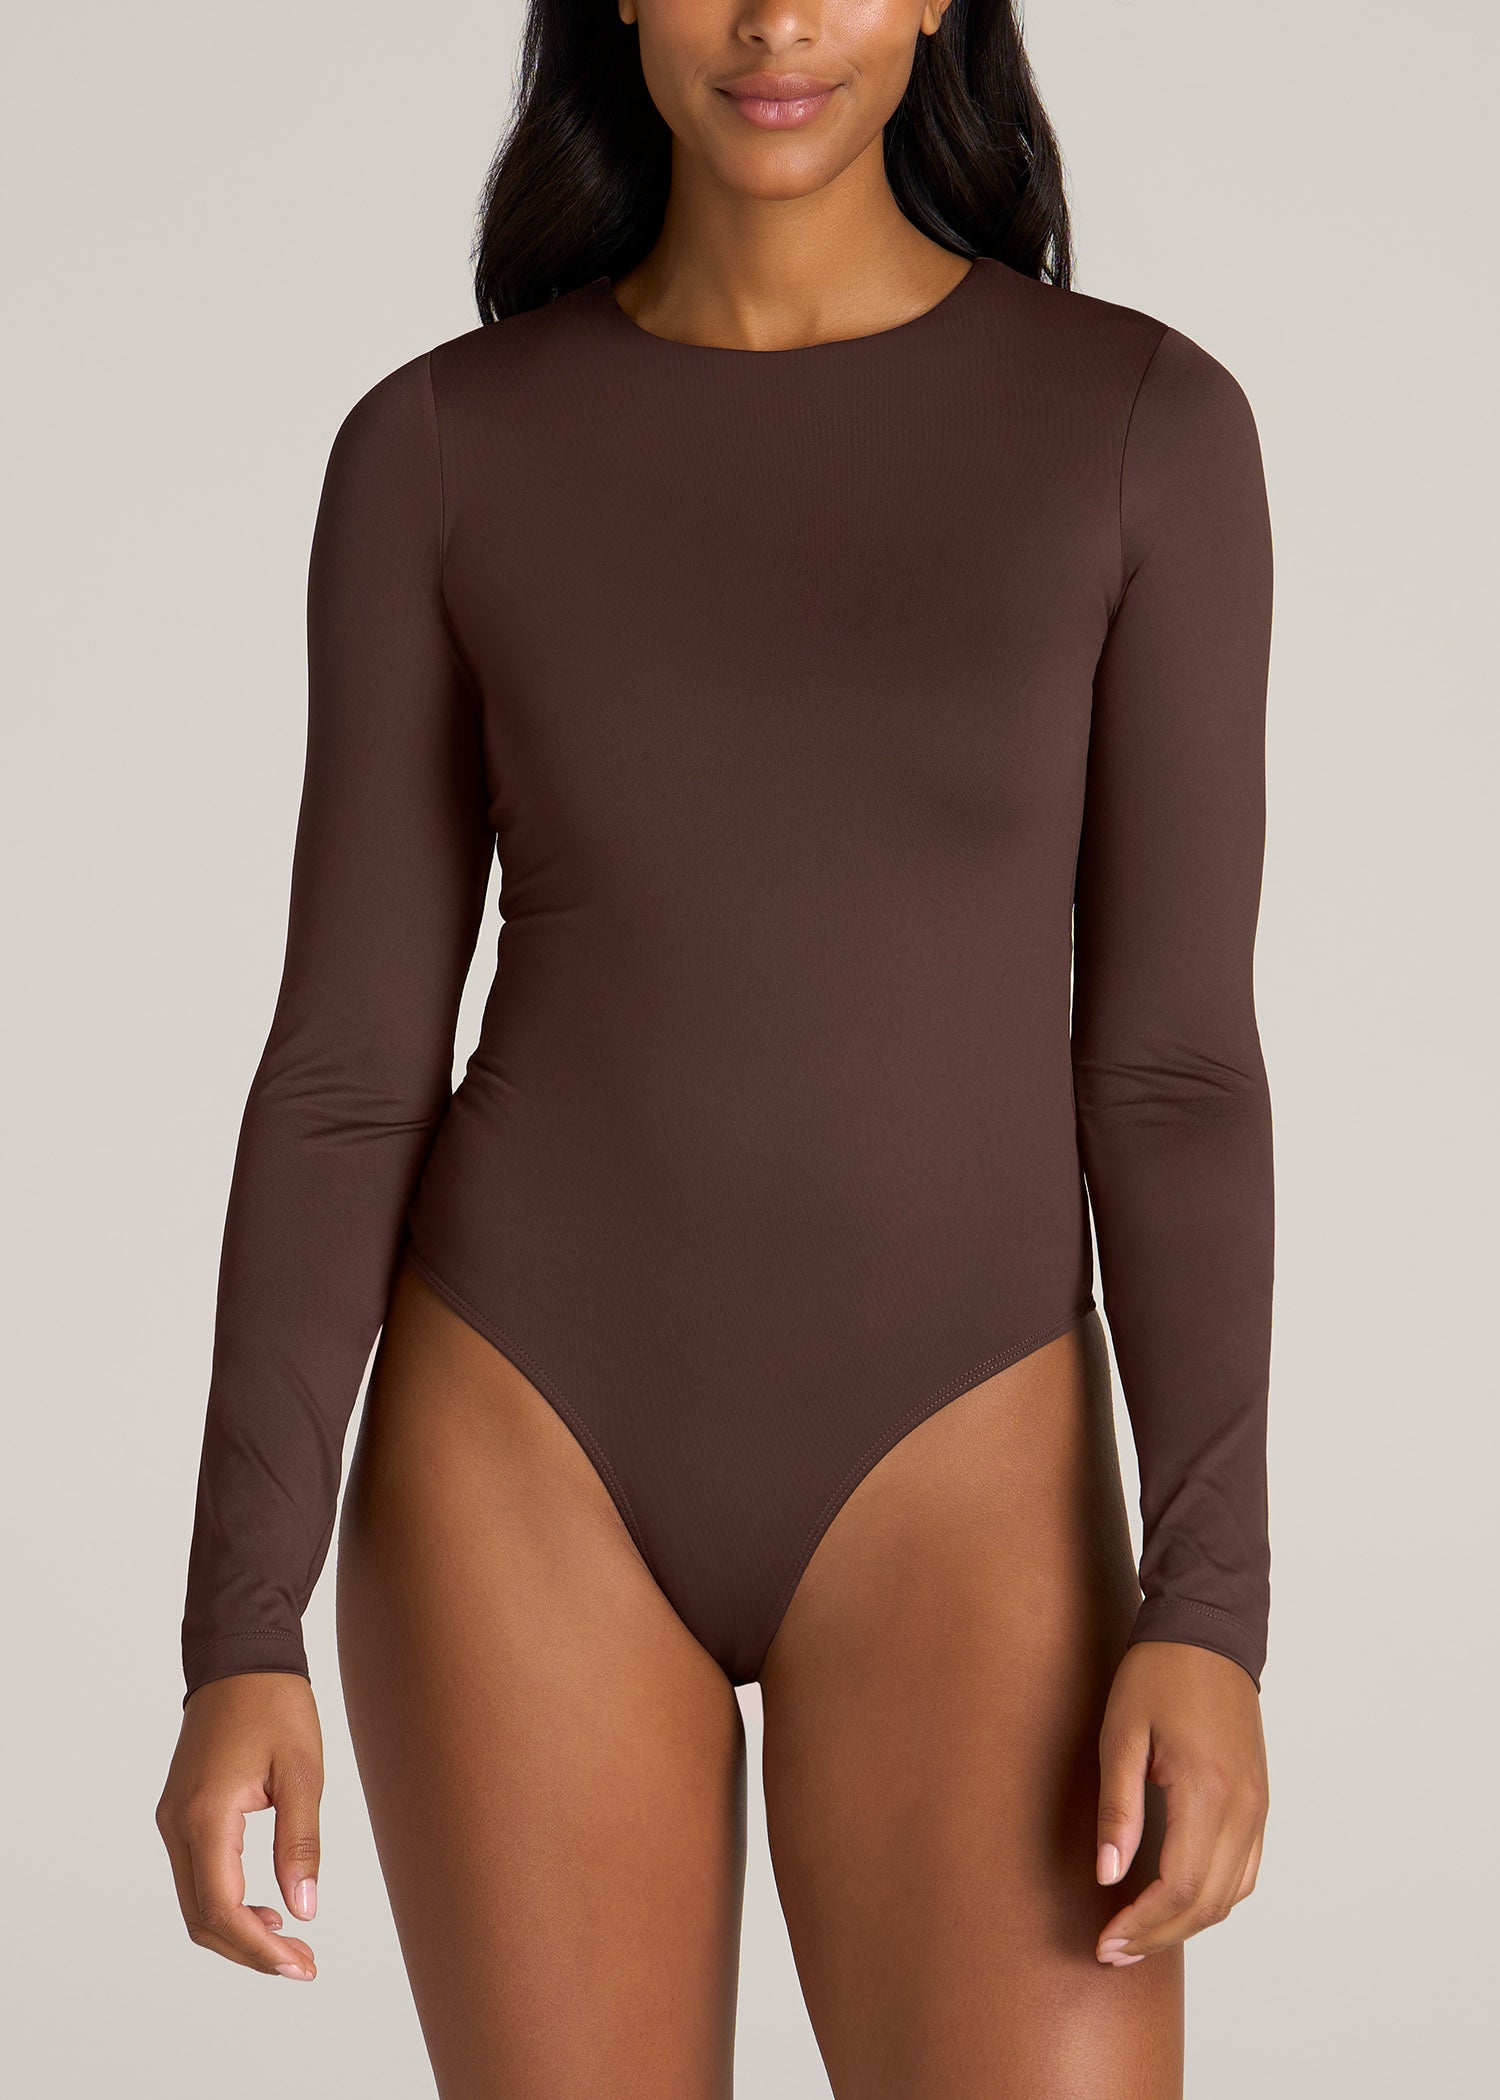 Skims Long Sleeve Open Bust Brief Bodysuit in Natural